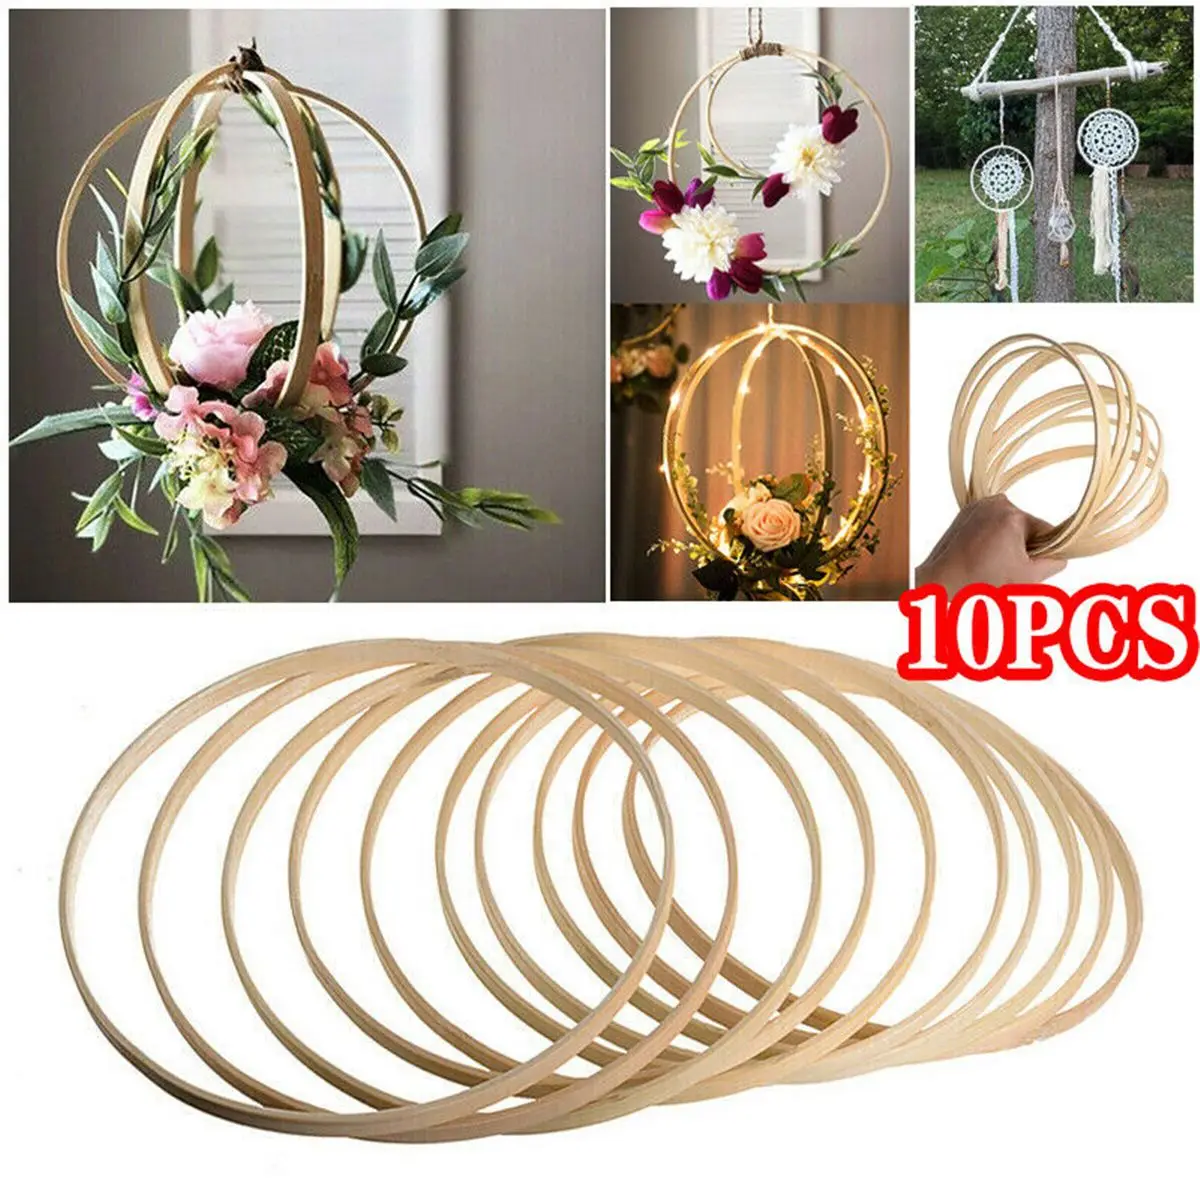 

10Pcs Dream Catcher Ring Round Wooden Bamboo Hoop DIY Crafts Tools Floral Hoop For Decoration Household Dream Catcher